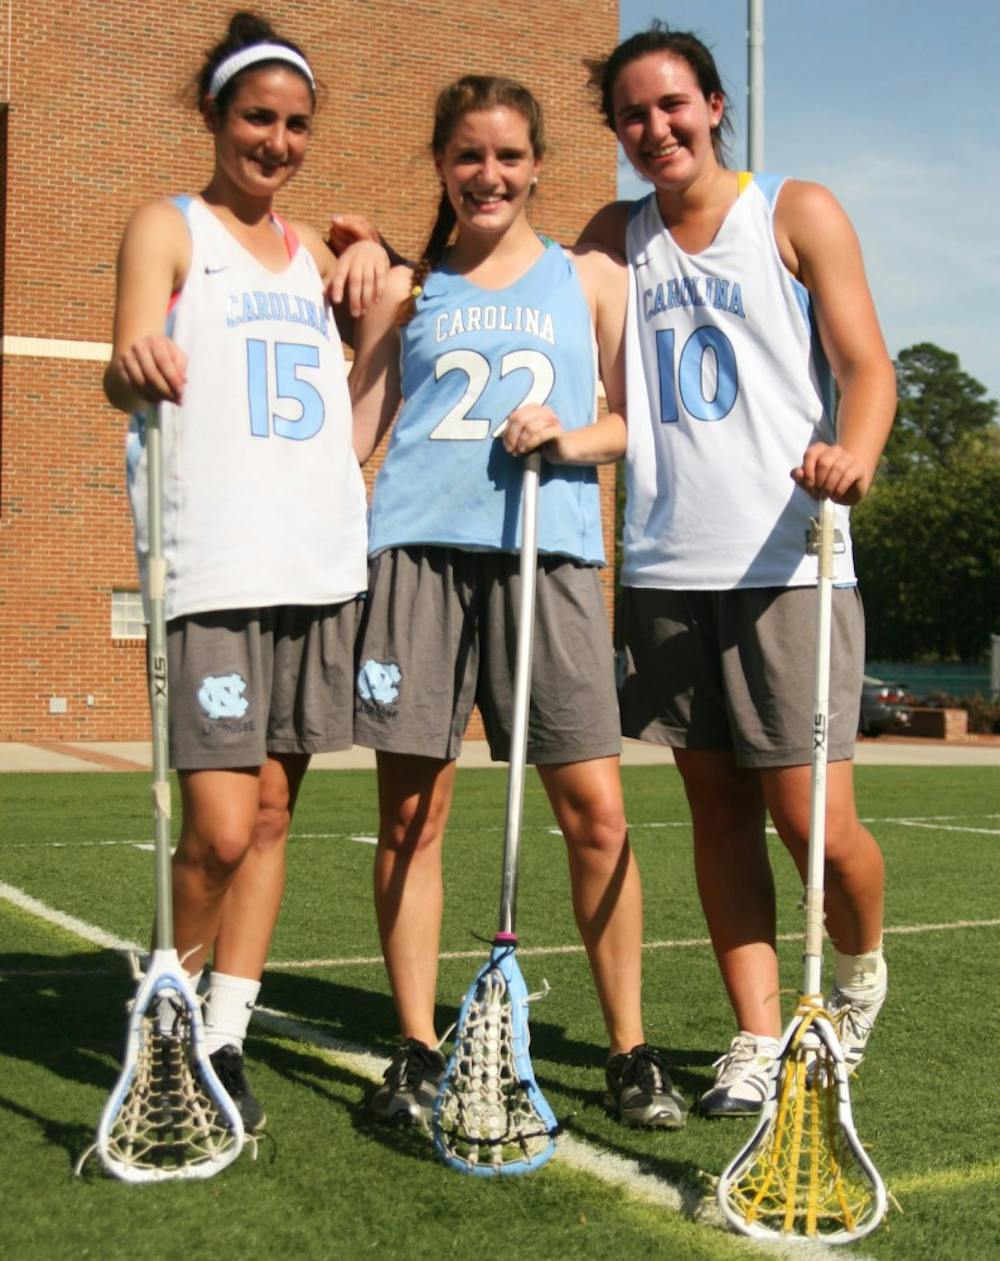 Kara Cannizzaro, Emily Garrity and Jessica Griffin have helped the North Carolina women’s lacrosse team. DTH/Shar-narne’ Flowers